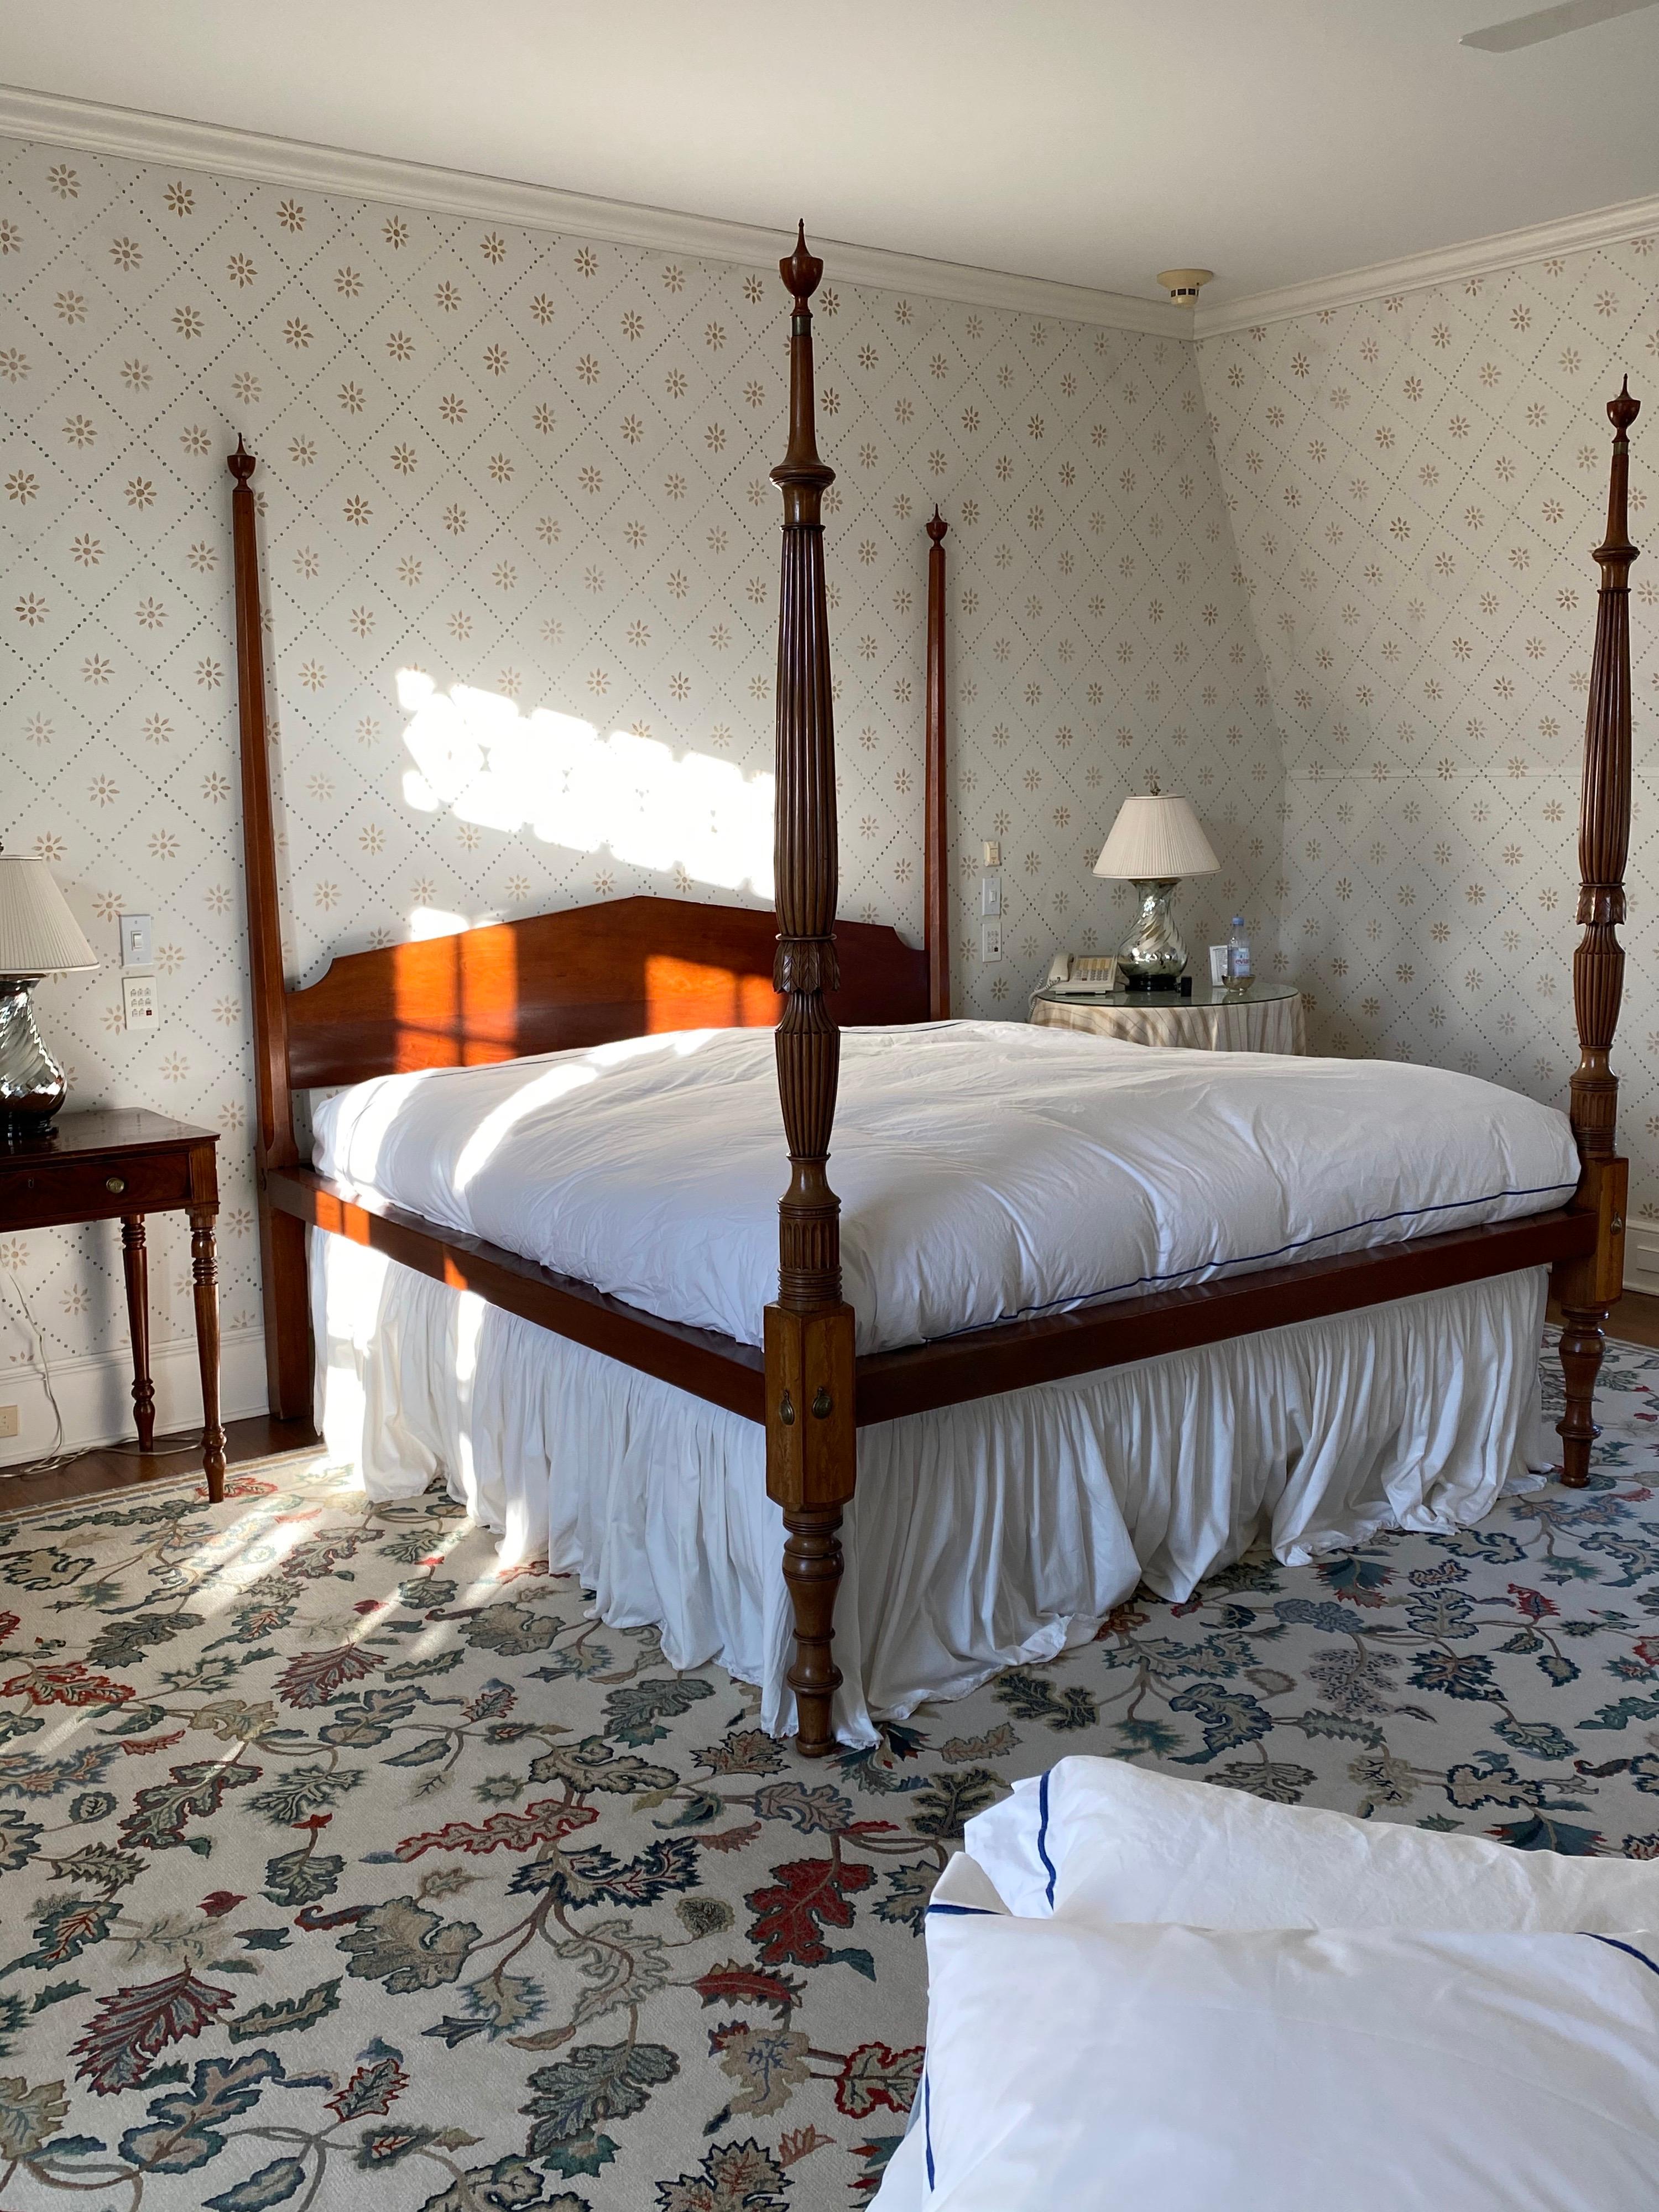 American Federal style mahogany king size four-poster bed. Carved and Reeded four-poster bed with flame birch panels. Attributed to Judkins and Senter (w. 1808-1826), Portsmouth, New Hampshire.
Measures: 89